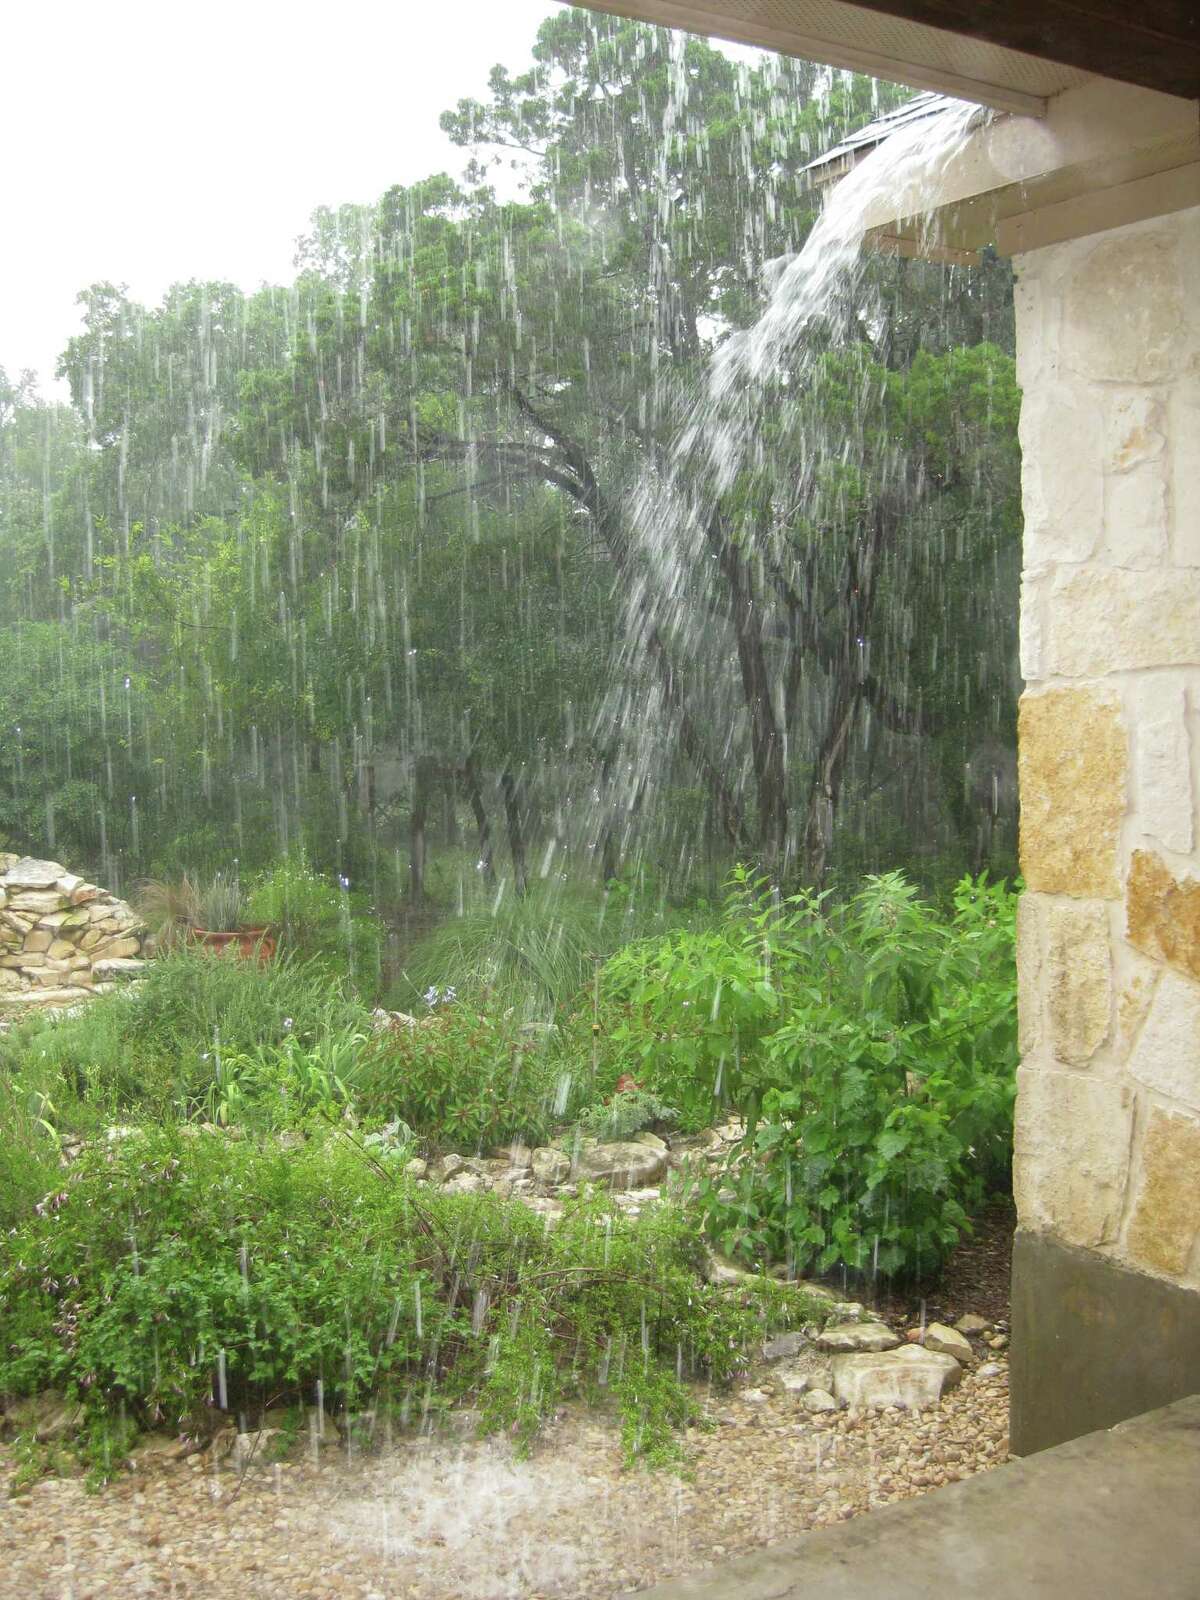 Steady rains in 2015, especially in May, have saturated the ground and created unfamiliar issues for gardeners accustomed to drought. Good drainage and careful choice of plants can keep gardens looking good in drought or downpours, both facts of life in the region.